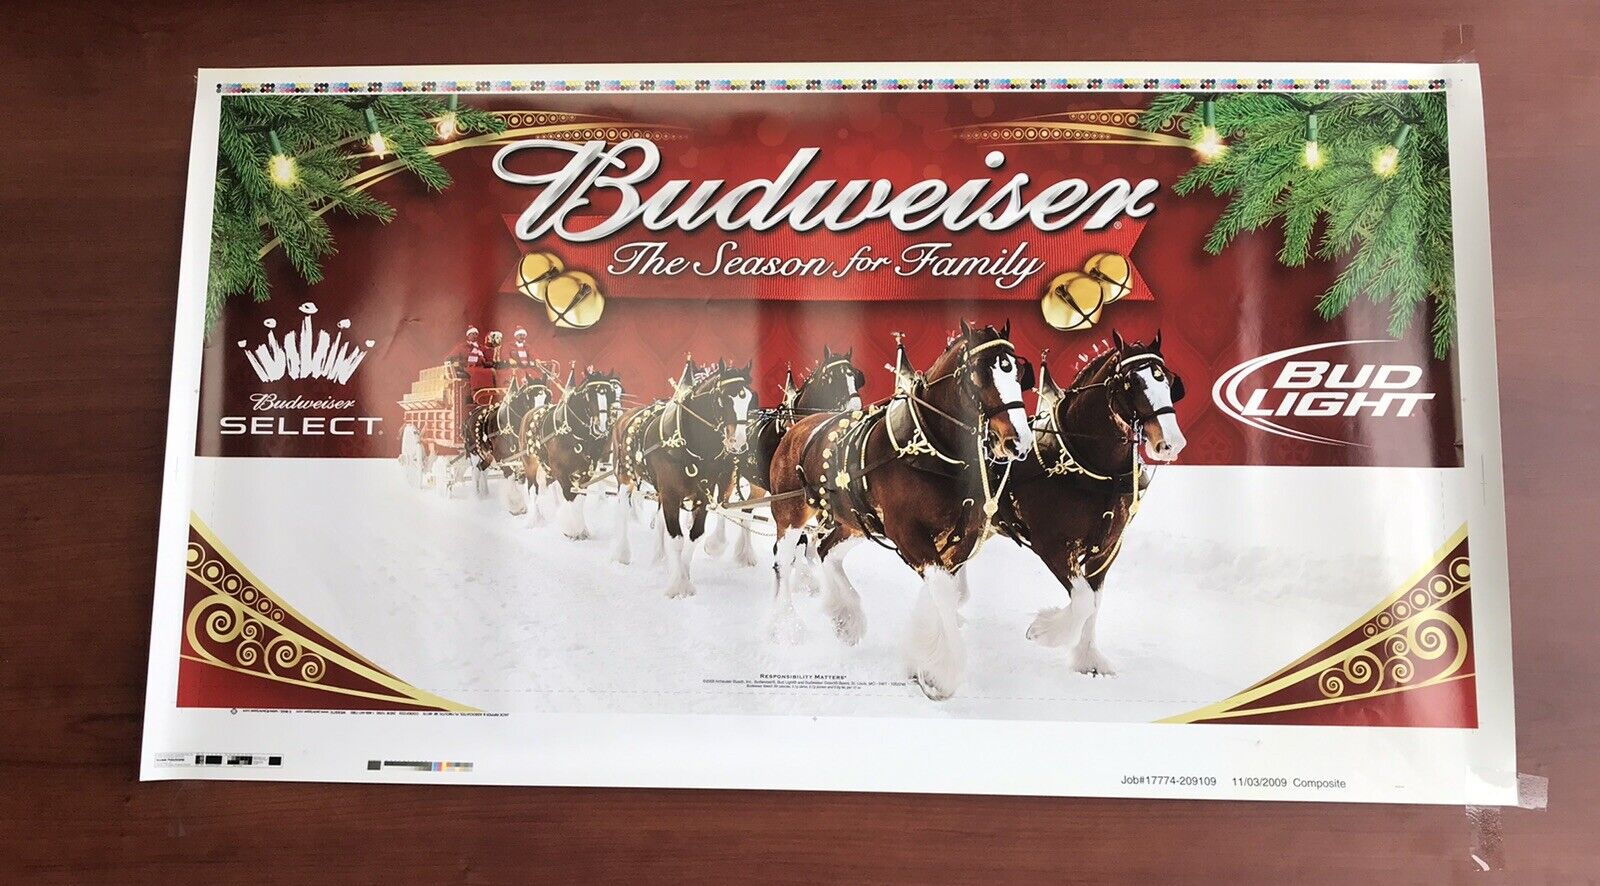 Budweiser Clydesdales Advertising Print